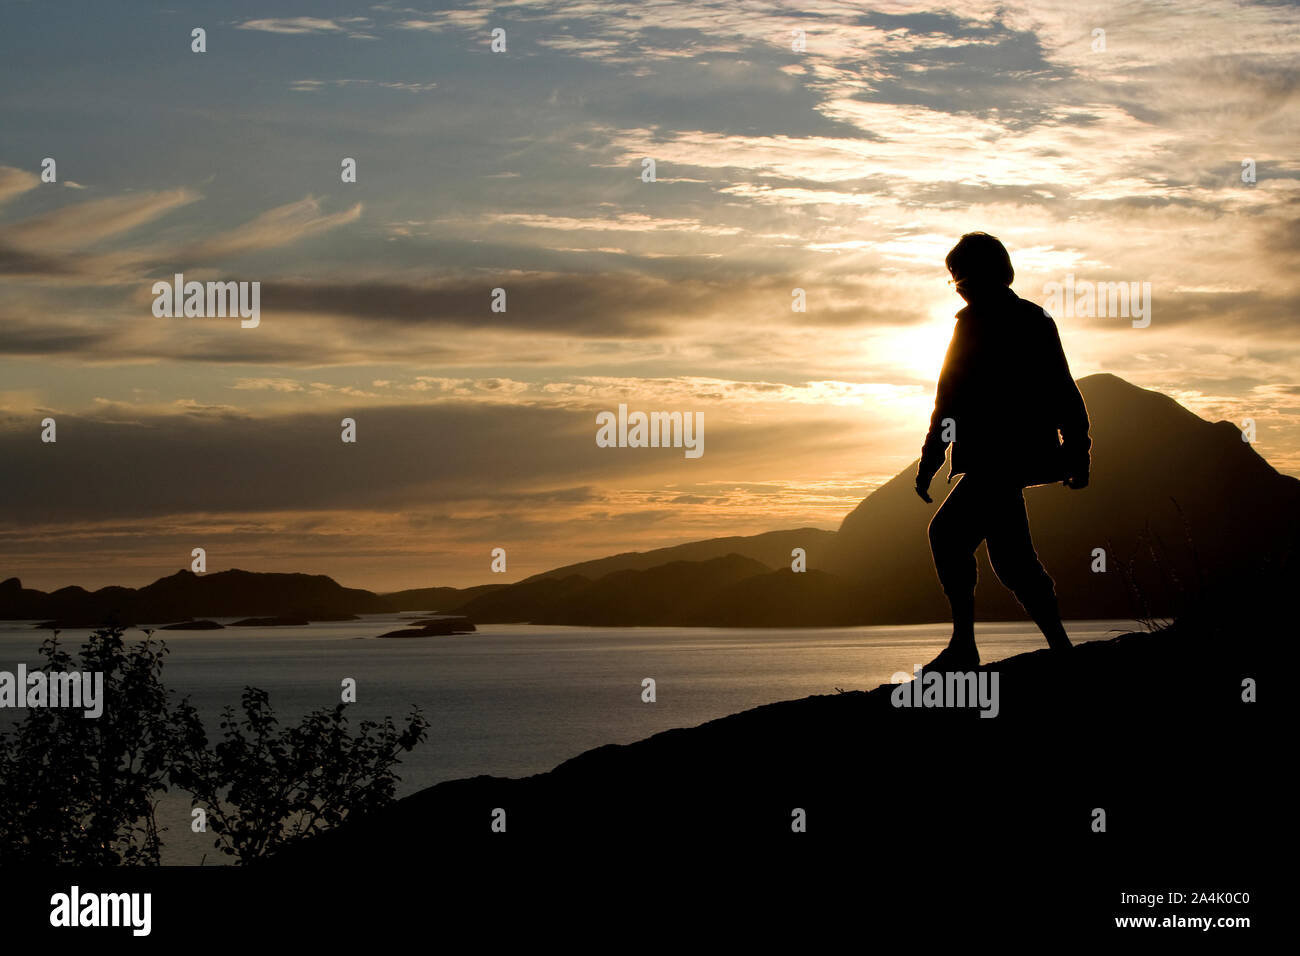 Silhouette of person in front of lake Stock Photo